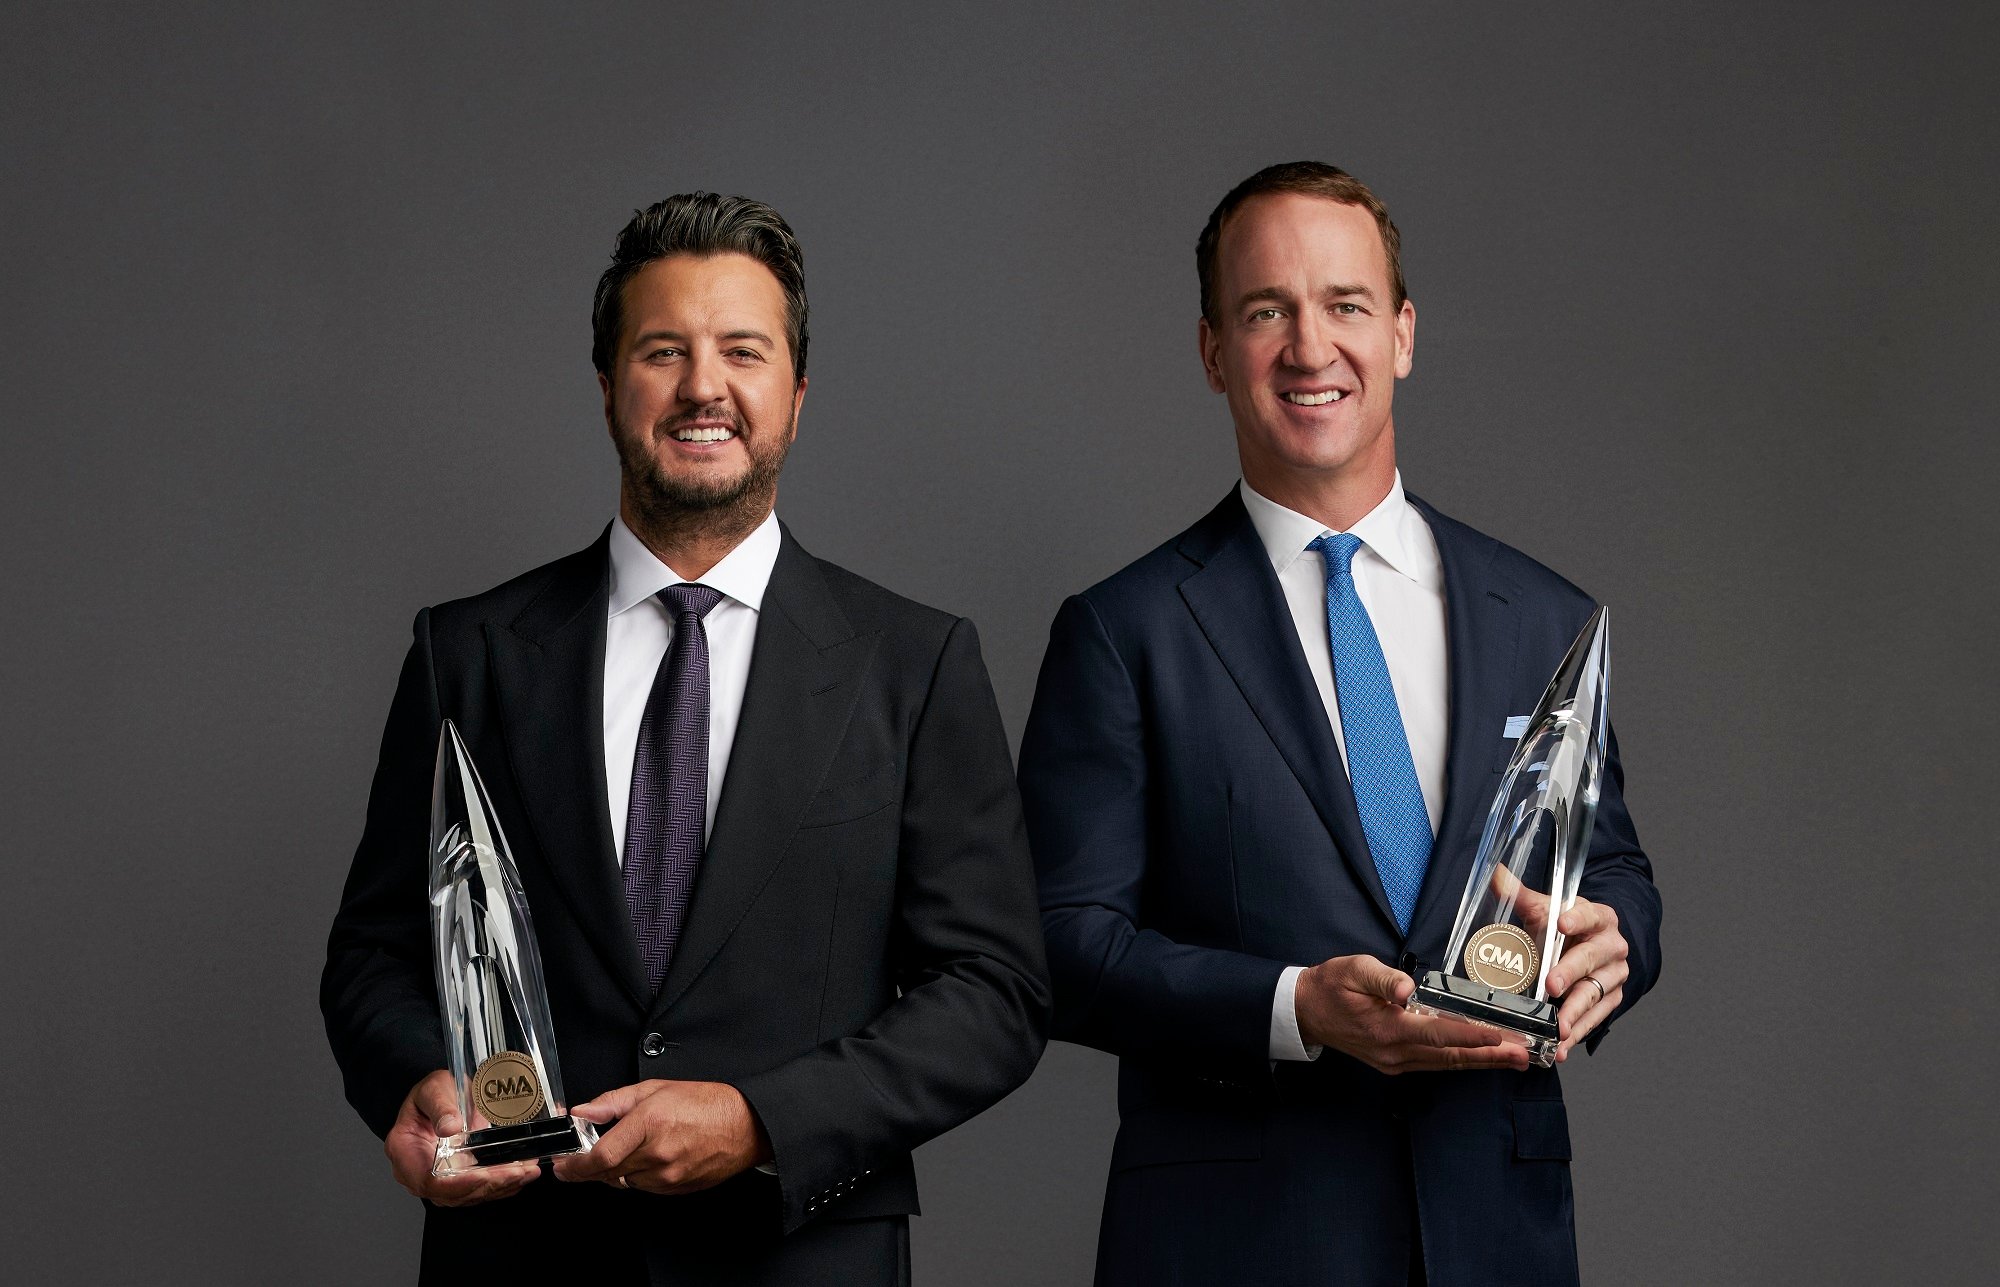 Luke Bryan and Peyton Manning pose with CMA trophies in front of a gray backdrop